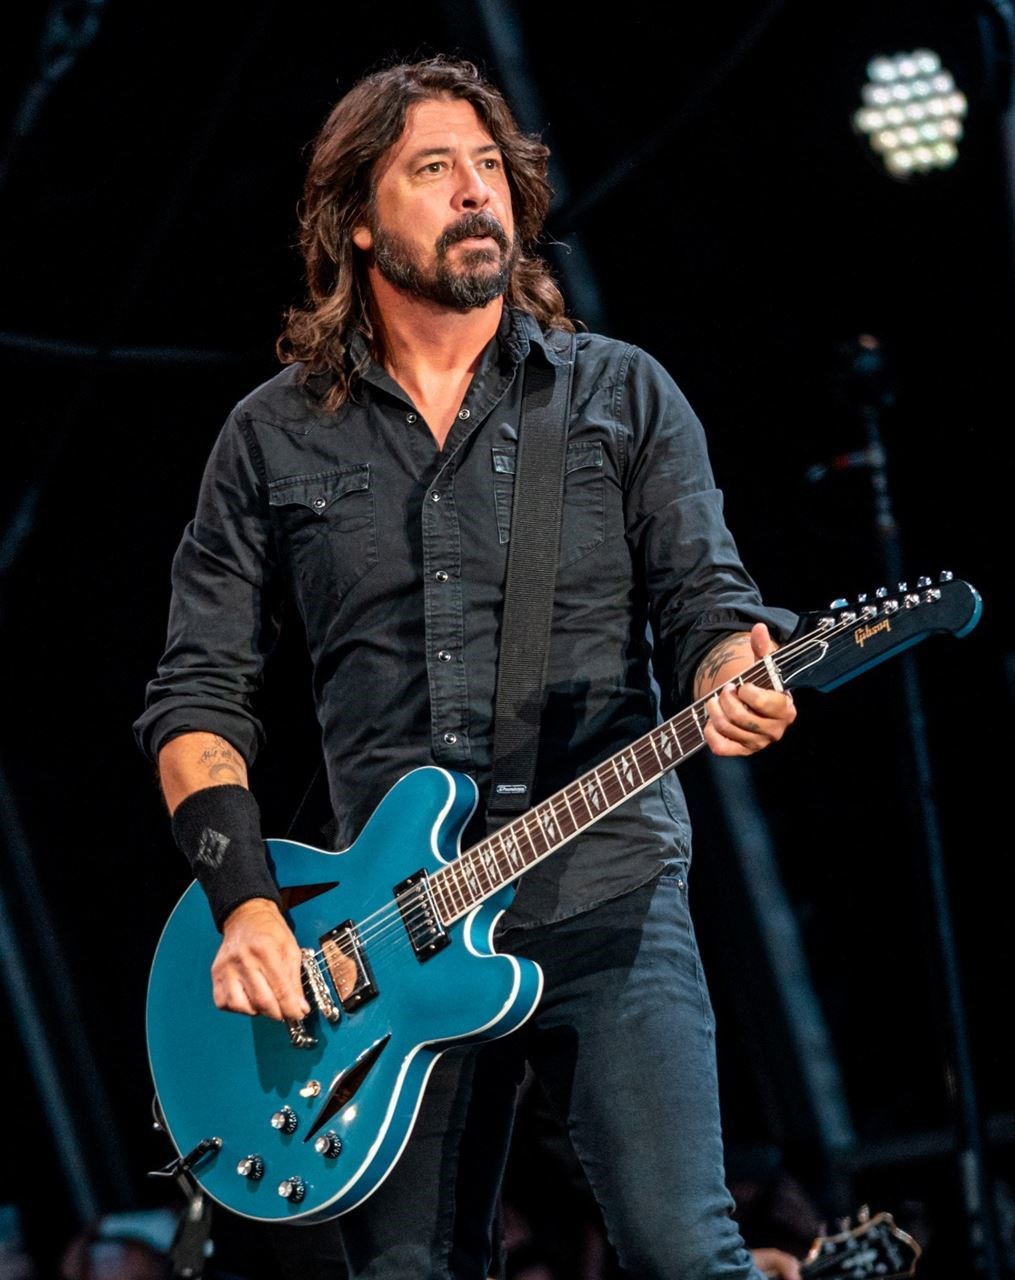 Love, Audrey  Foo fighters, There goes my hero, Foo fighters dave grohl